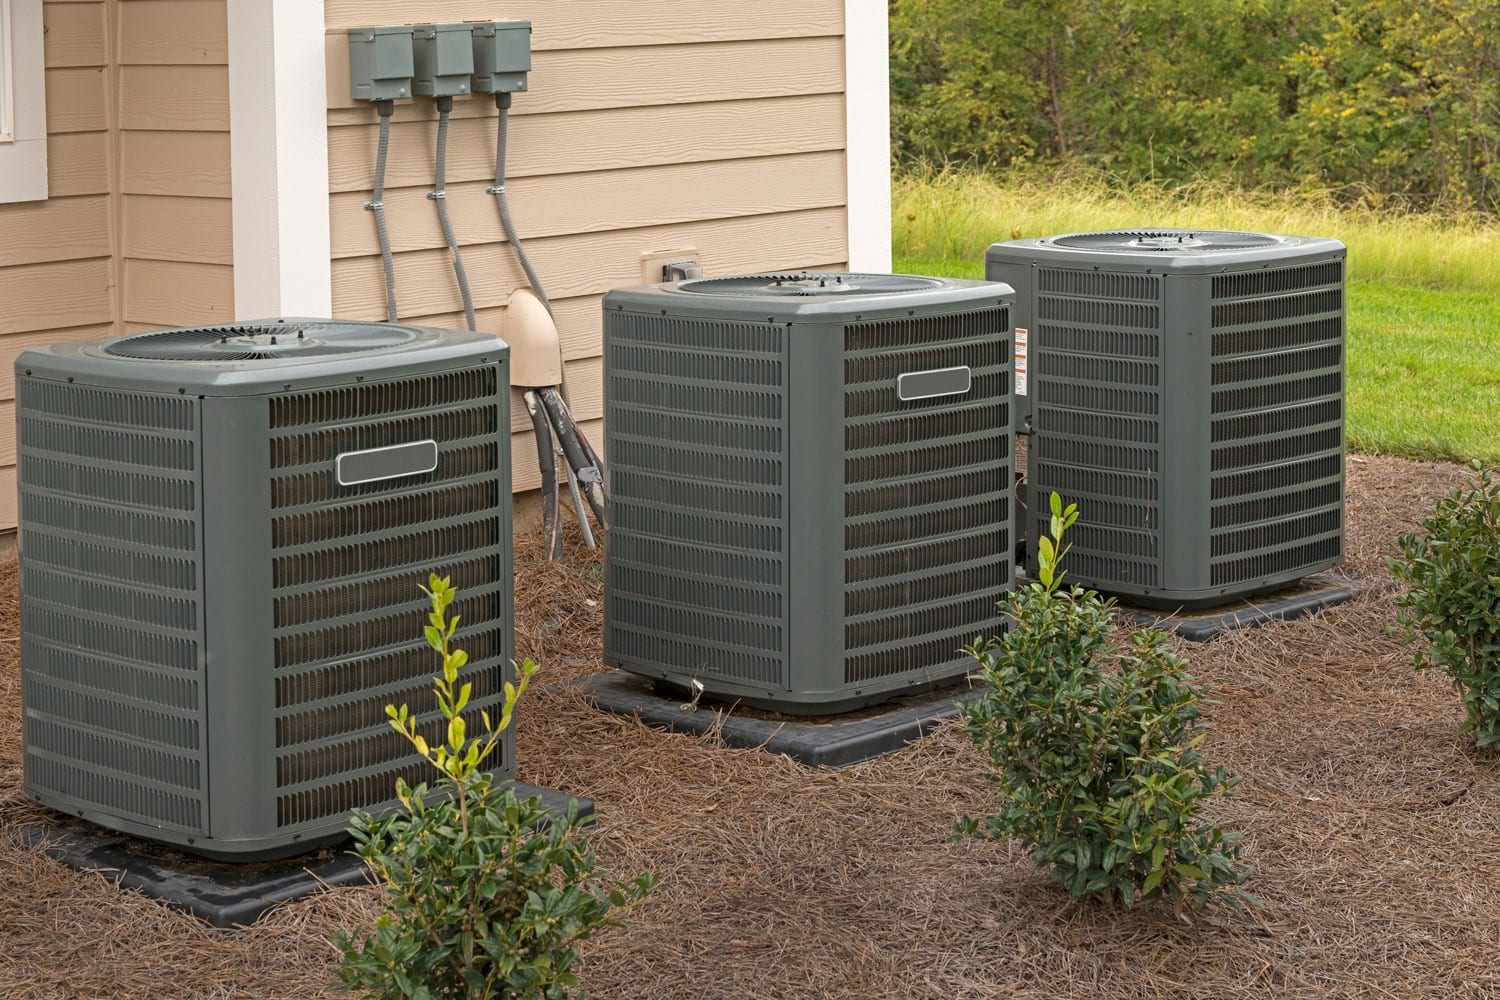 Outdoor air condition might need regular maintance to keep your outdoor unit working